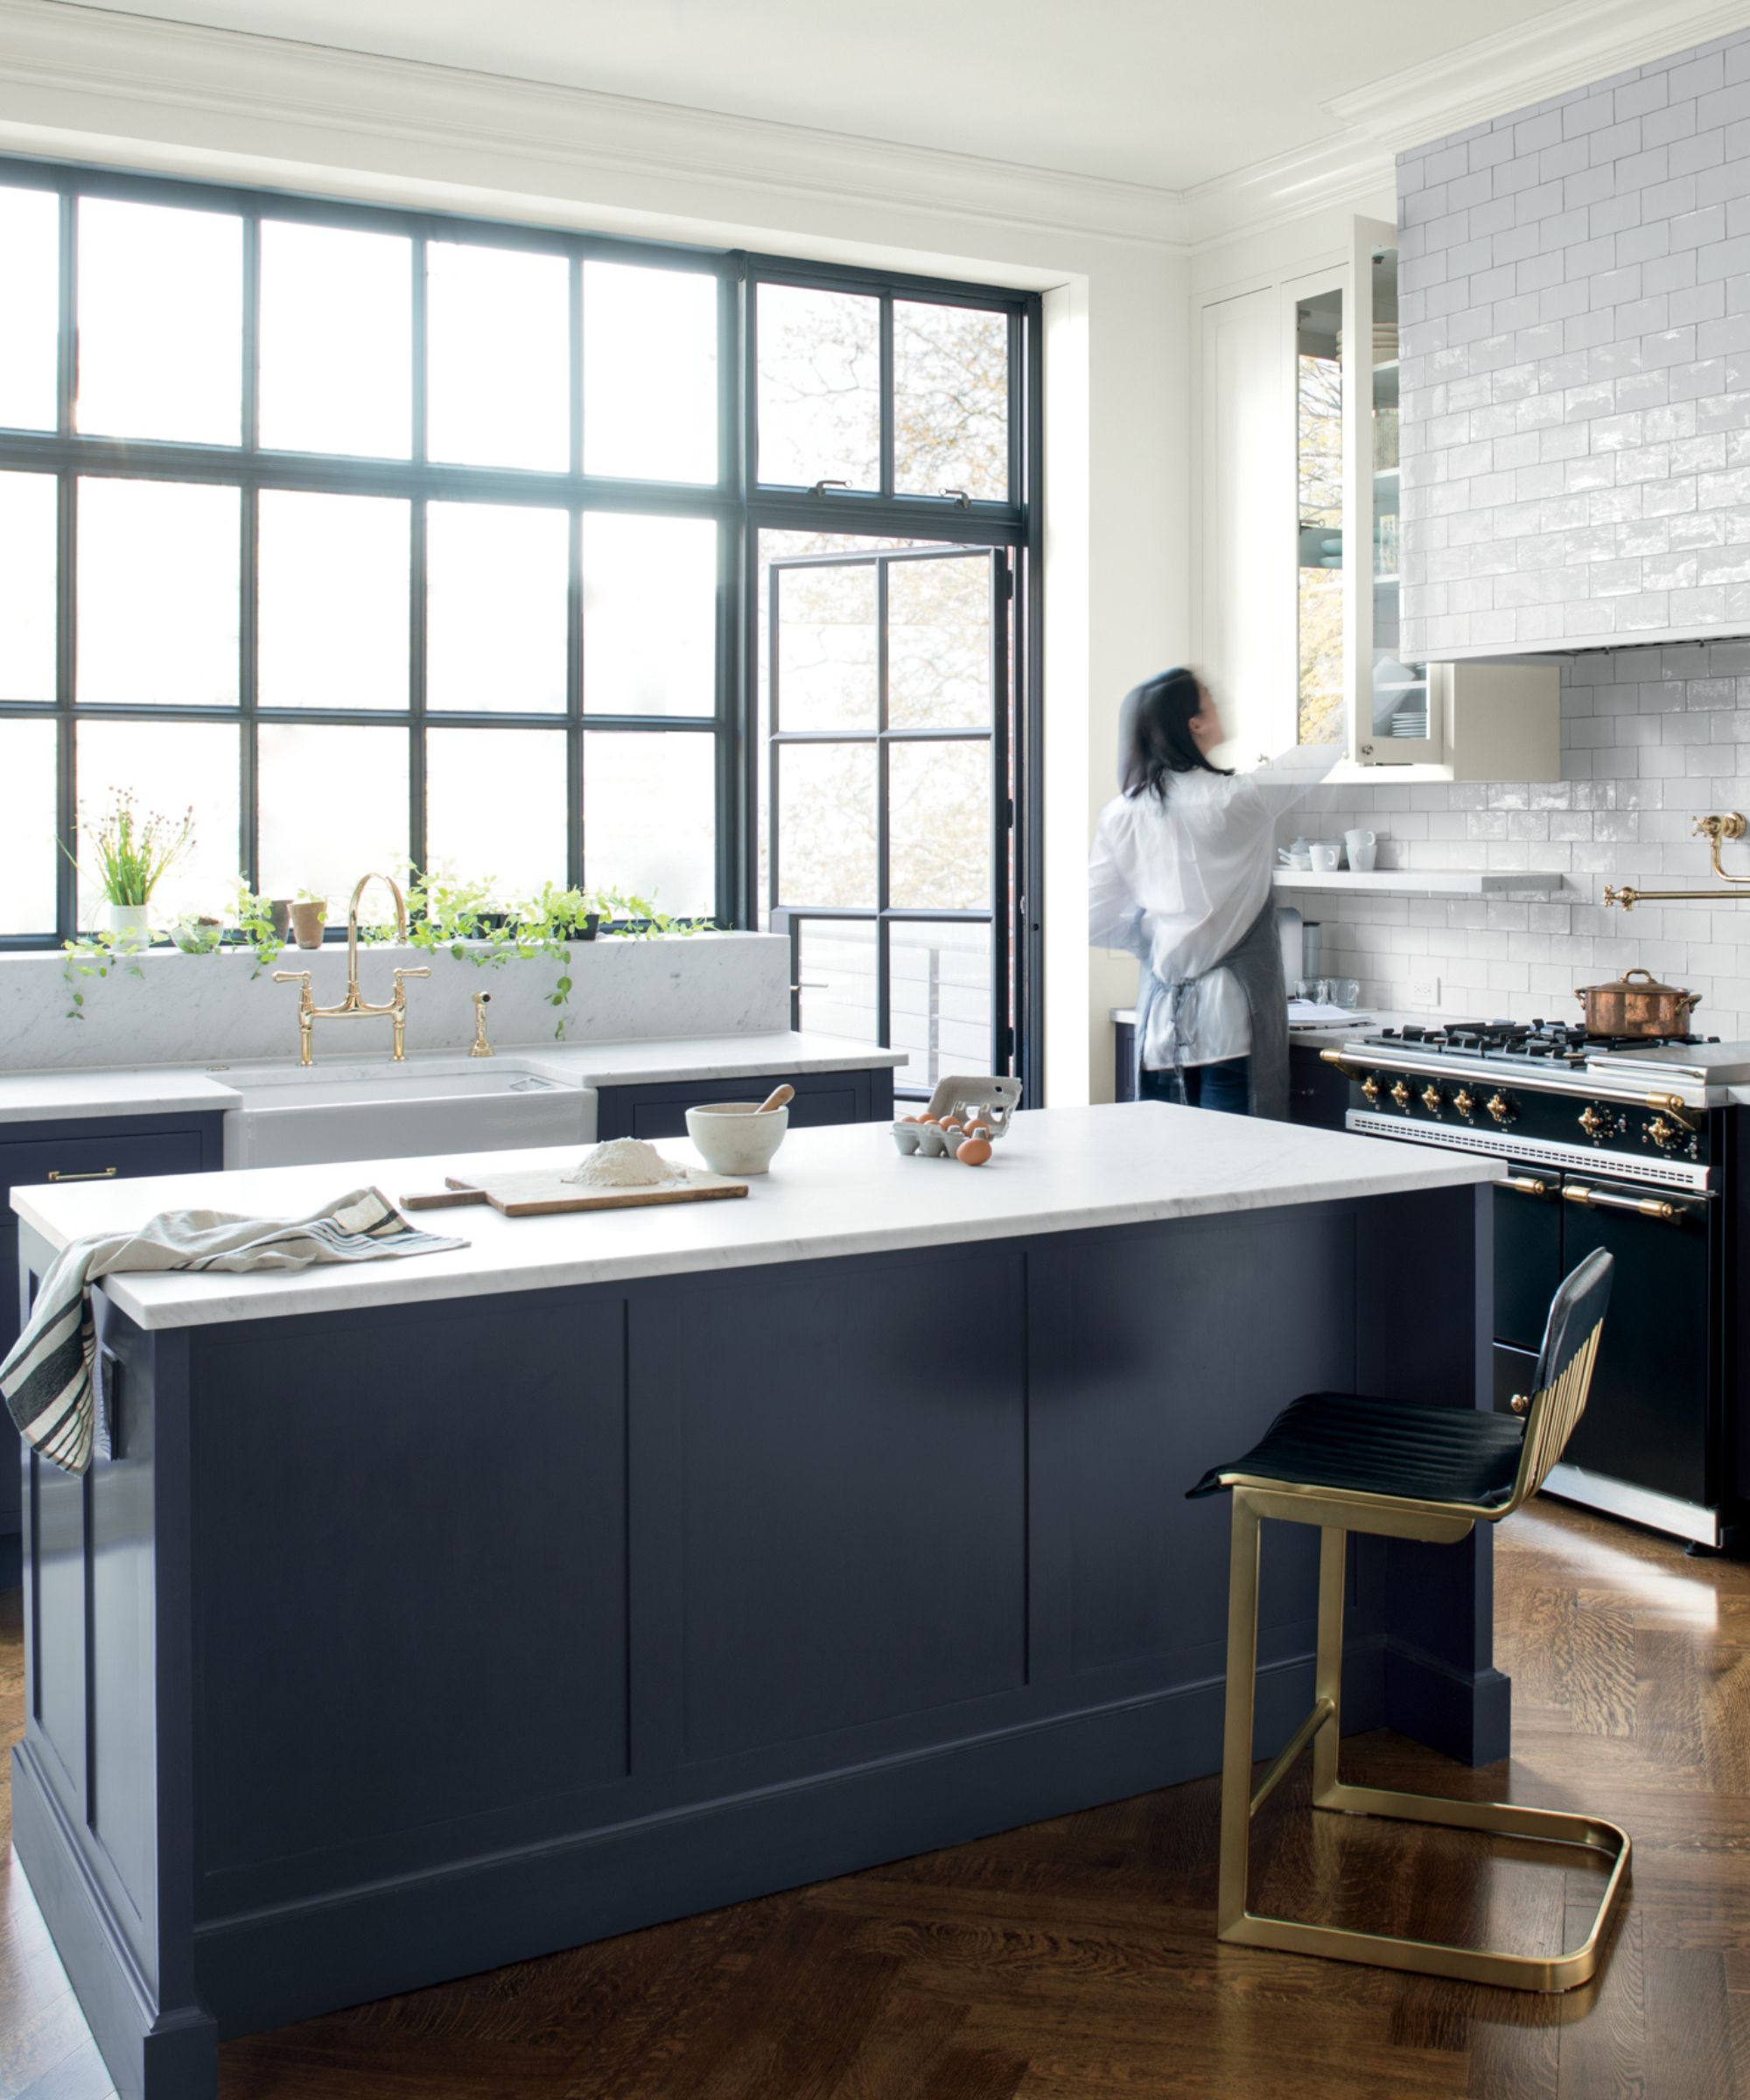 7 timeless kitchen cabinet colors for an endlessly classic look